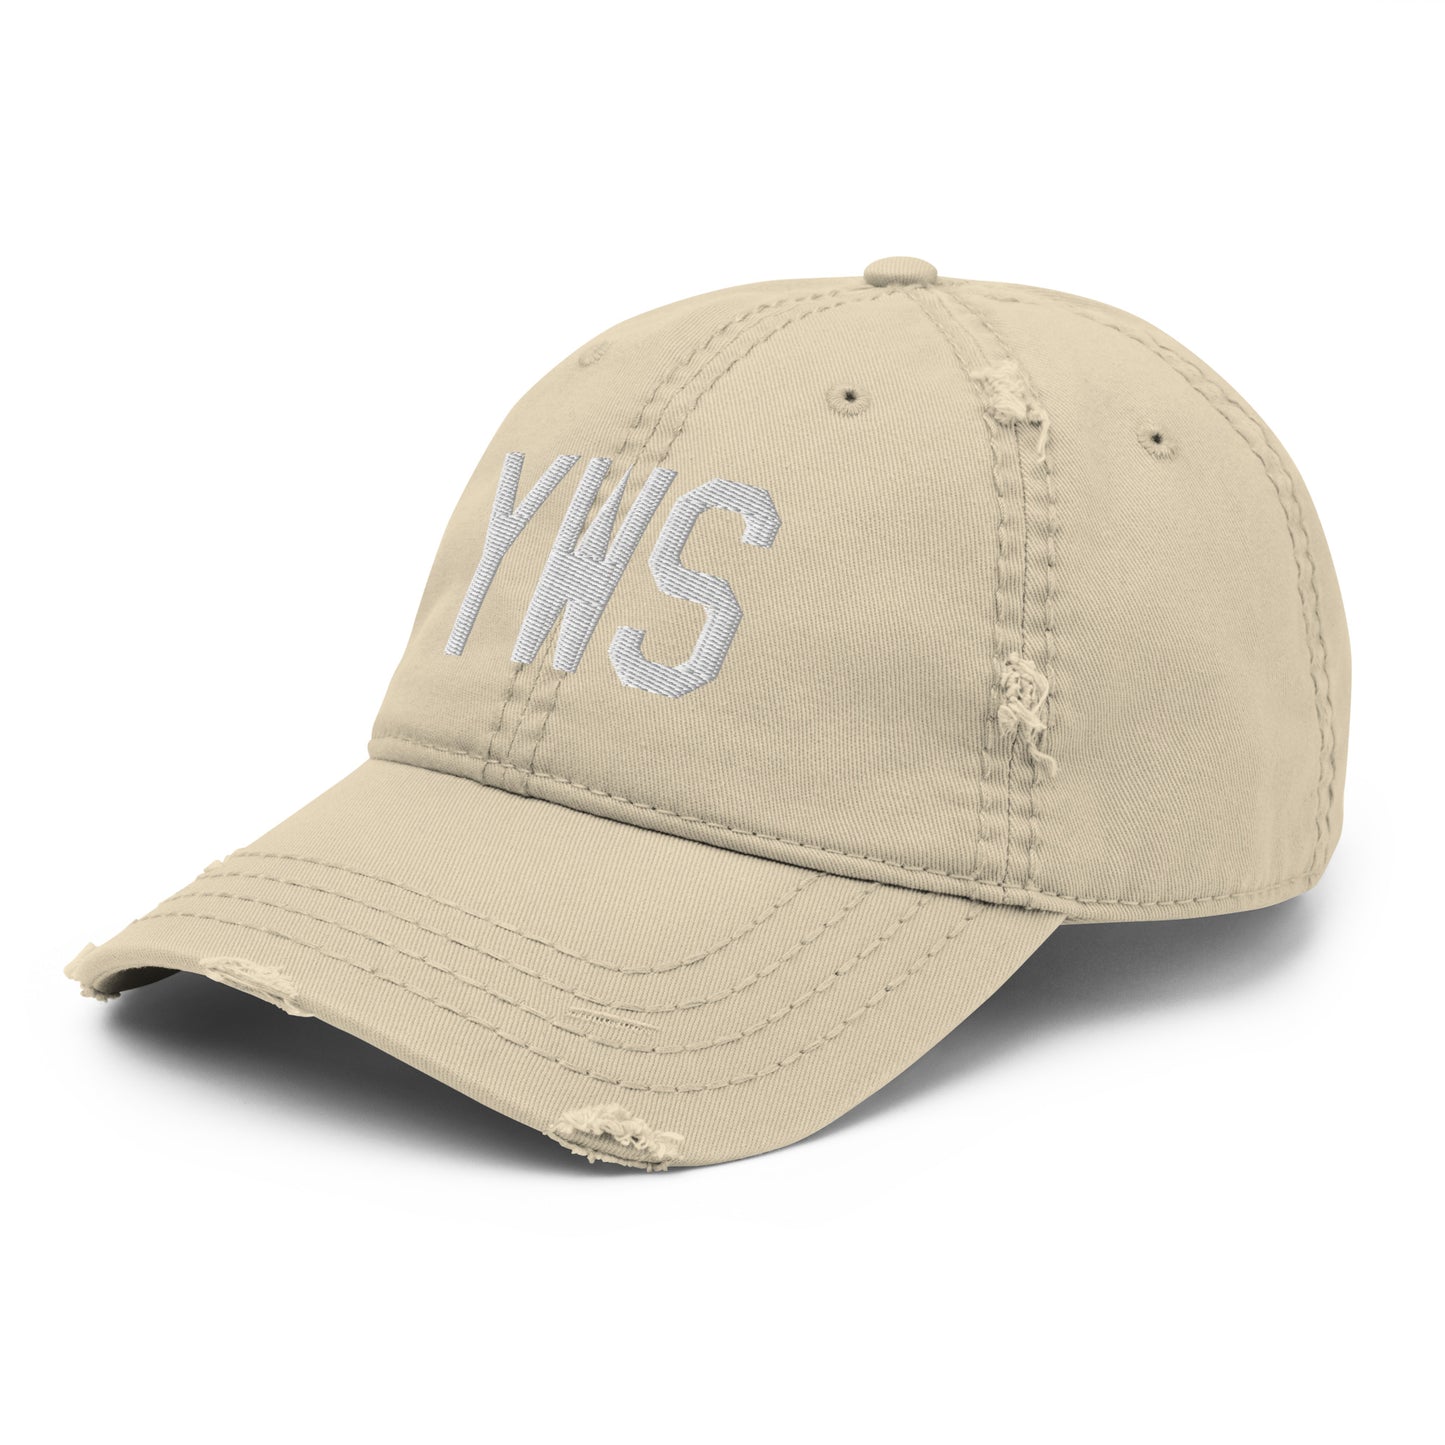 Airport Code Distressed Hat - White • YWS Whistler • YHM Designs - Image 19